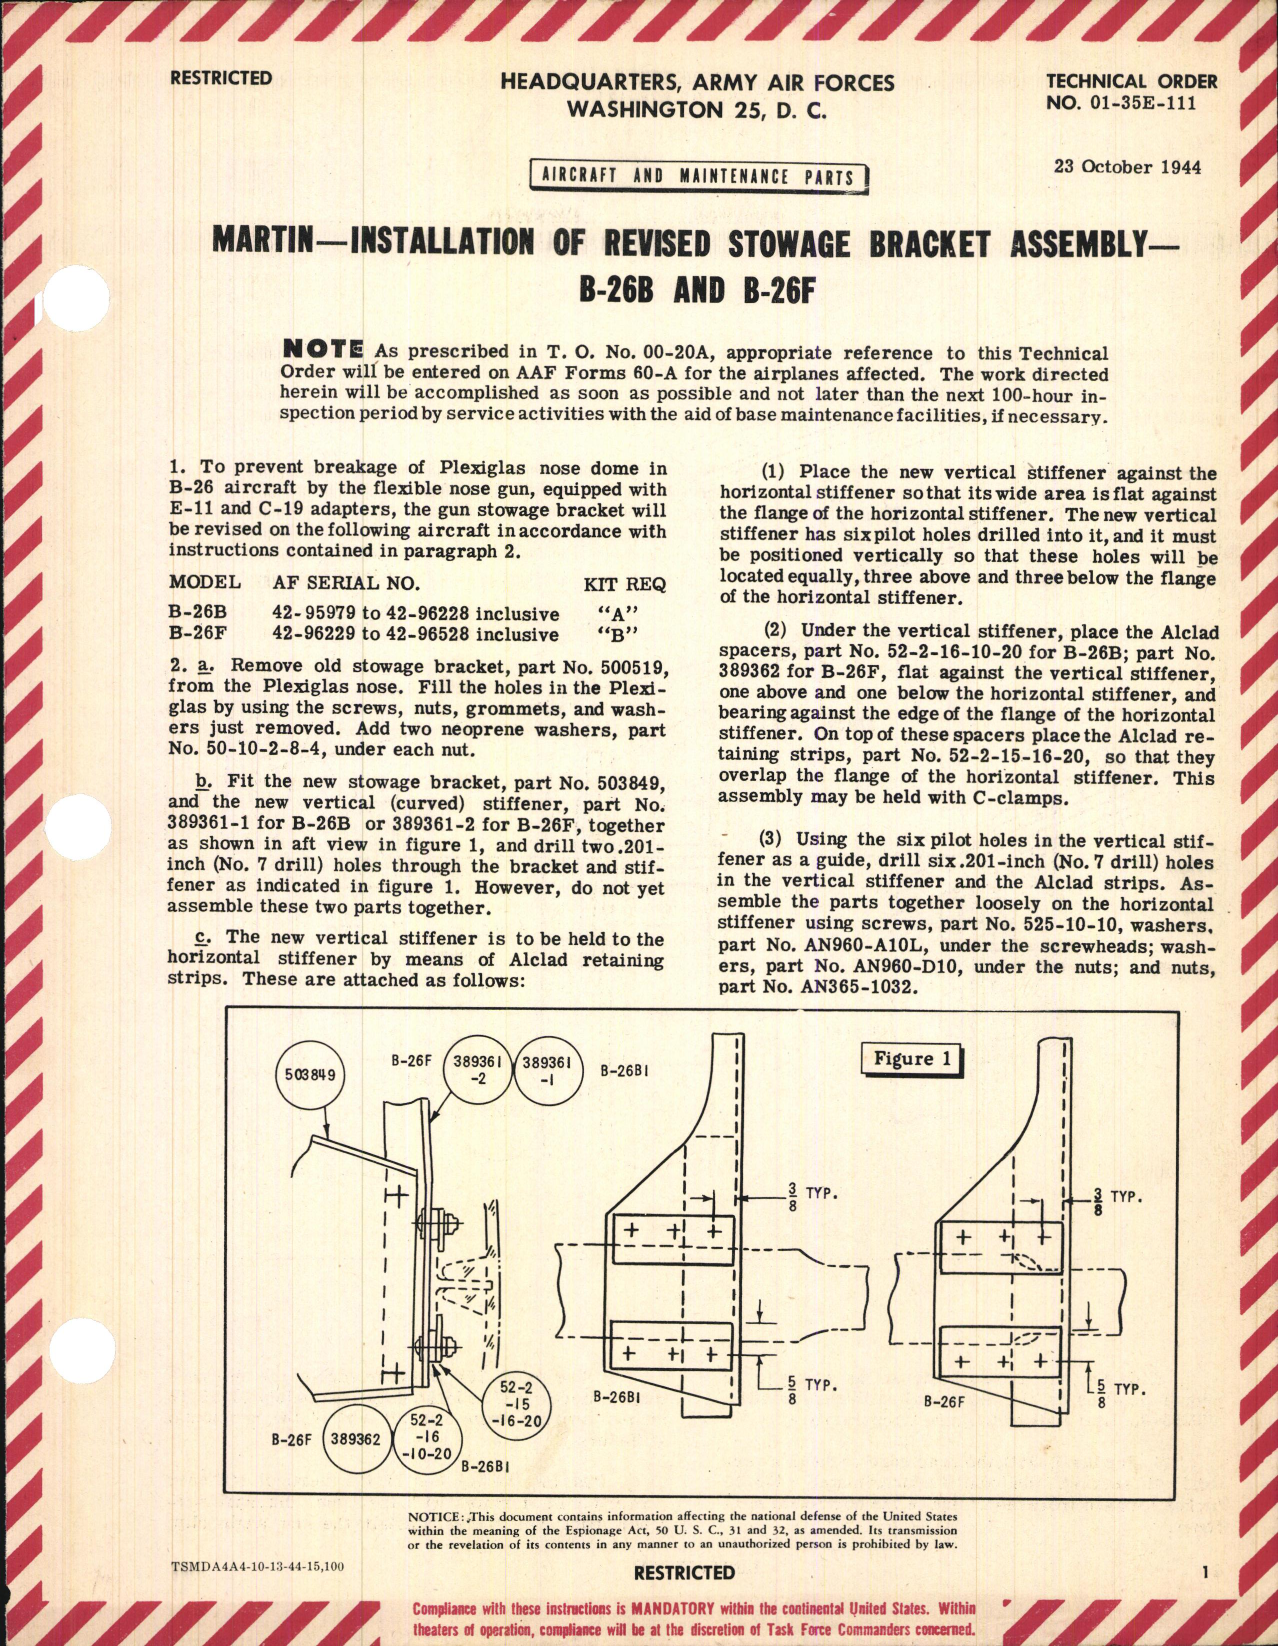 Sample page 1 from AirCorps Library document: Installation of Revised Stowage Bracket Assembly for B-26B and B-26F